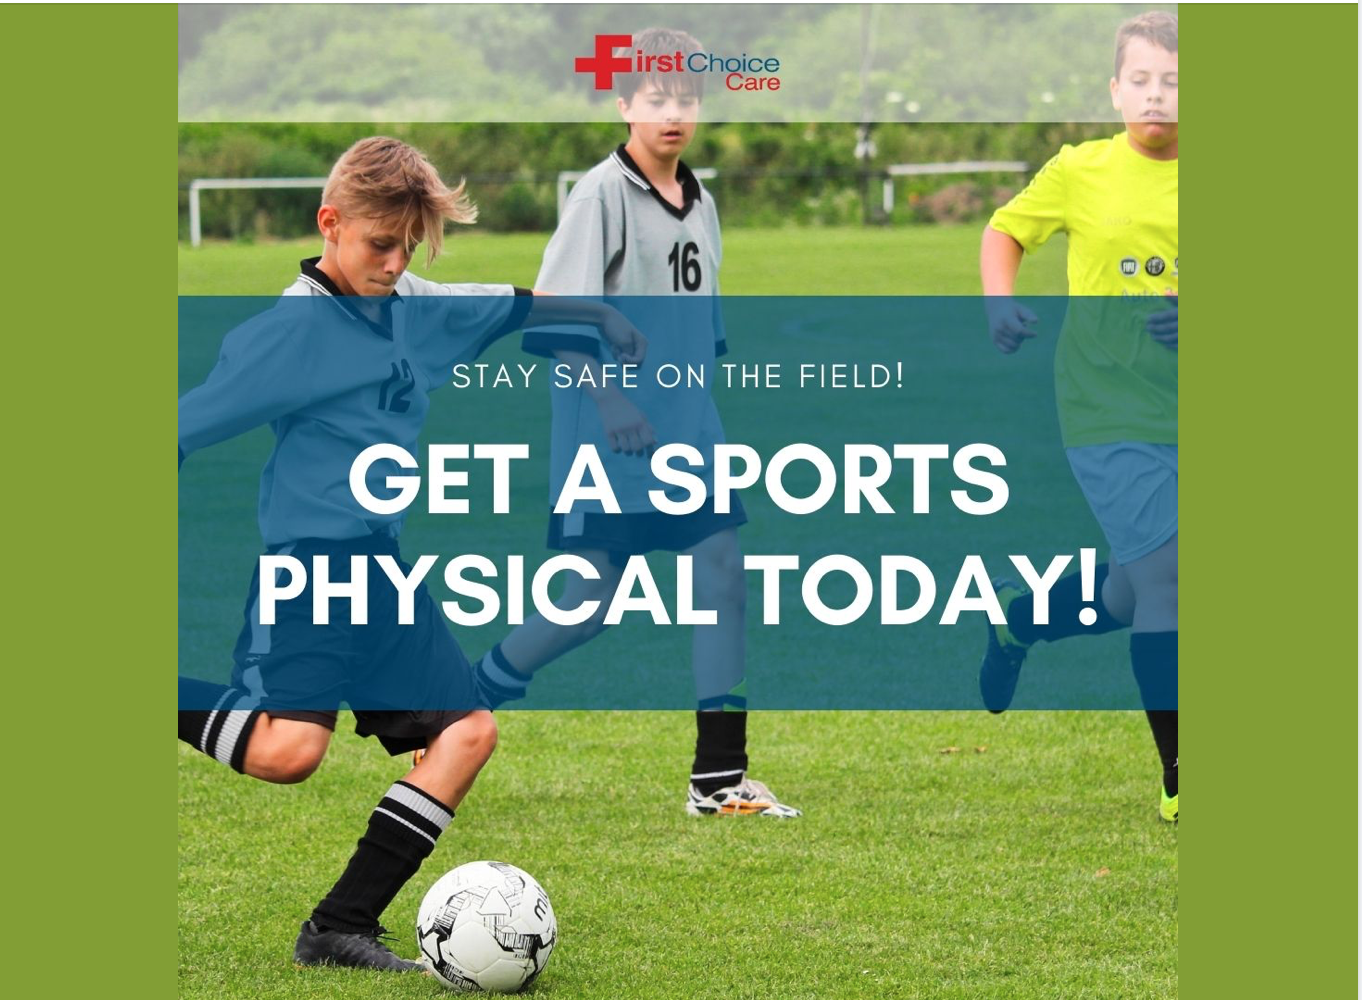 Are you or your children participating in sports this summer? Get a sports physical from First Choice Care!